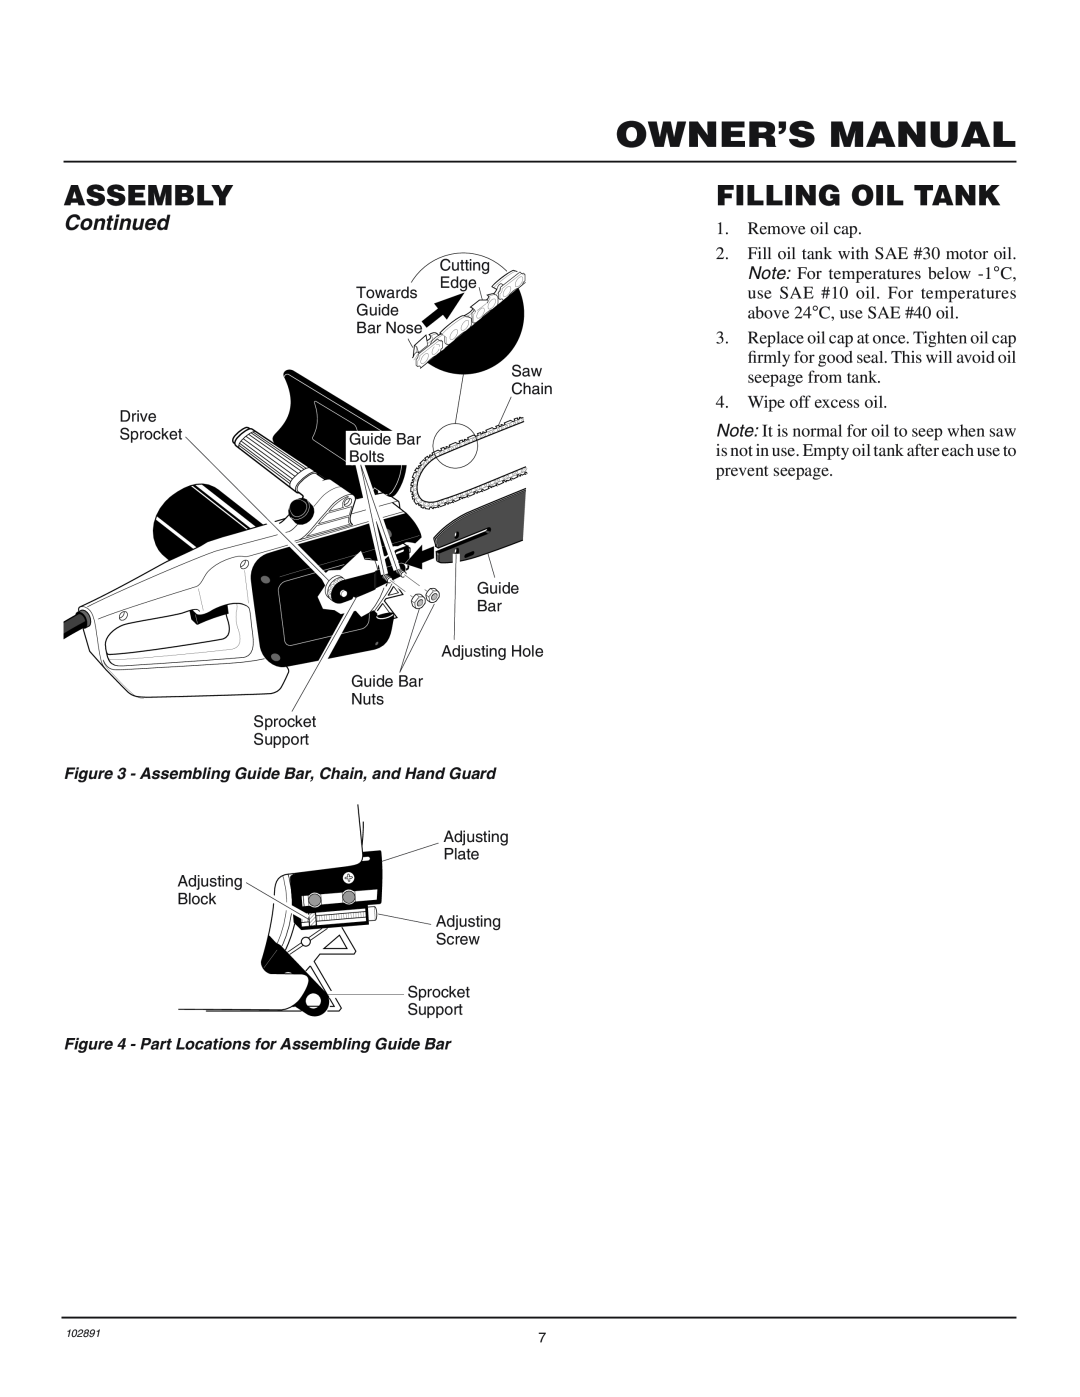 Desa 100271-01 owner manual Filling Oil Tank, Owner’S Manual, Assembly, Continued, Remove oil cap 